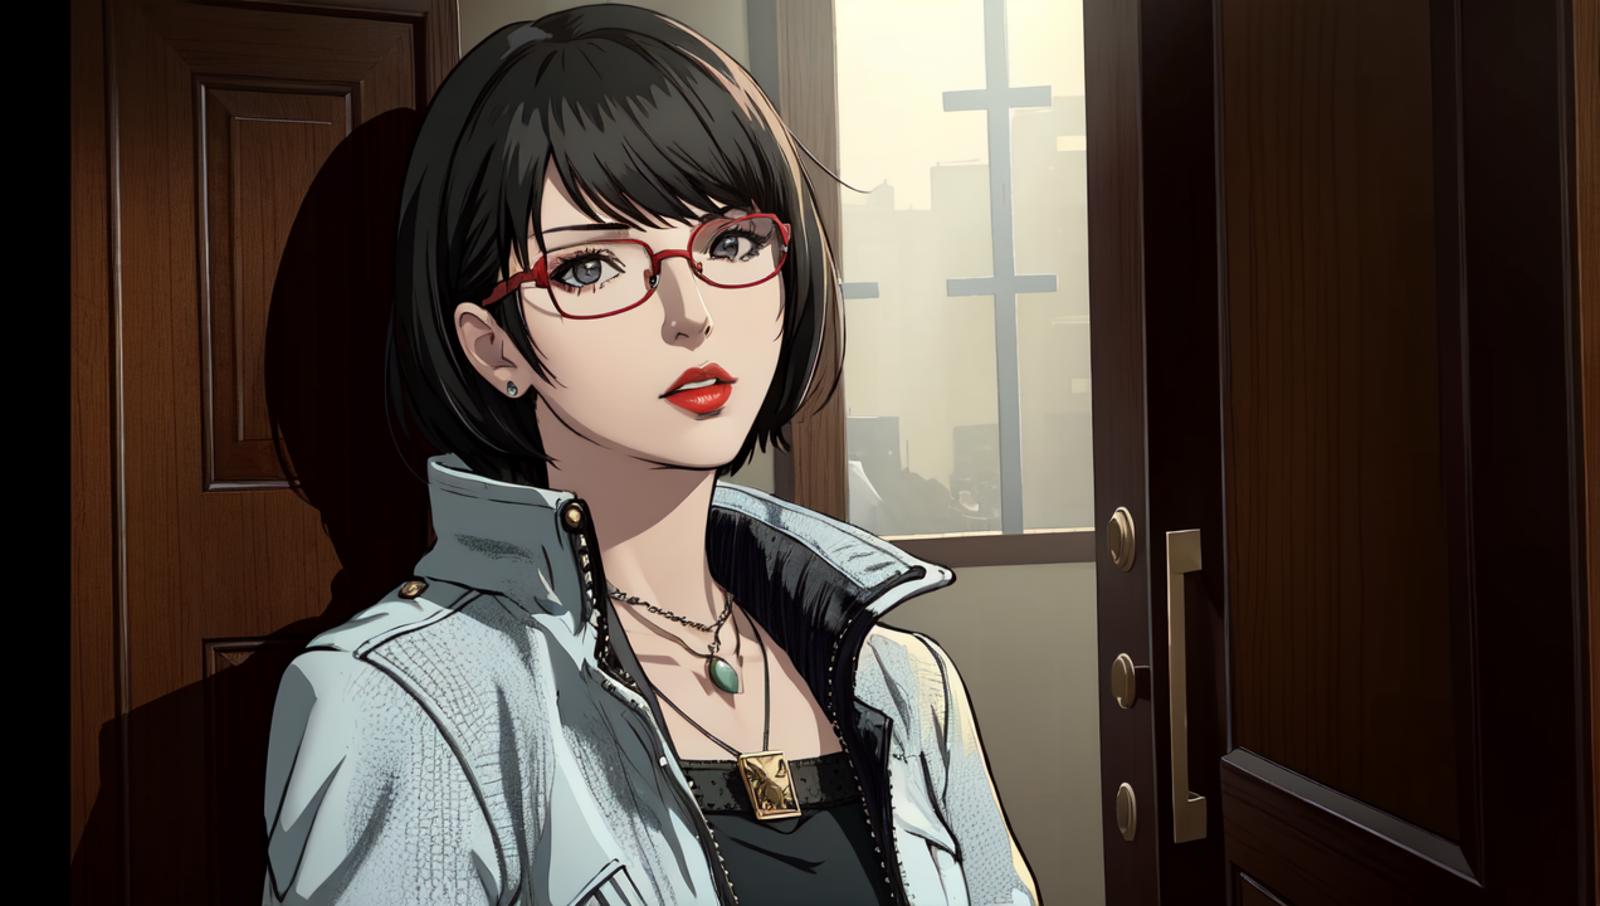 A cartoon woman with glasses and a black jacket stands in front of a door.